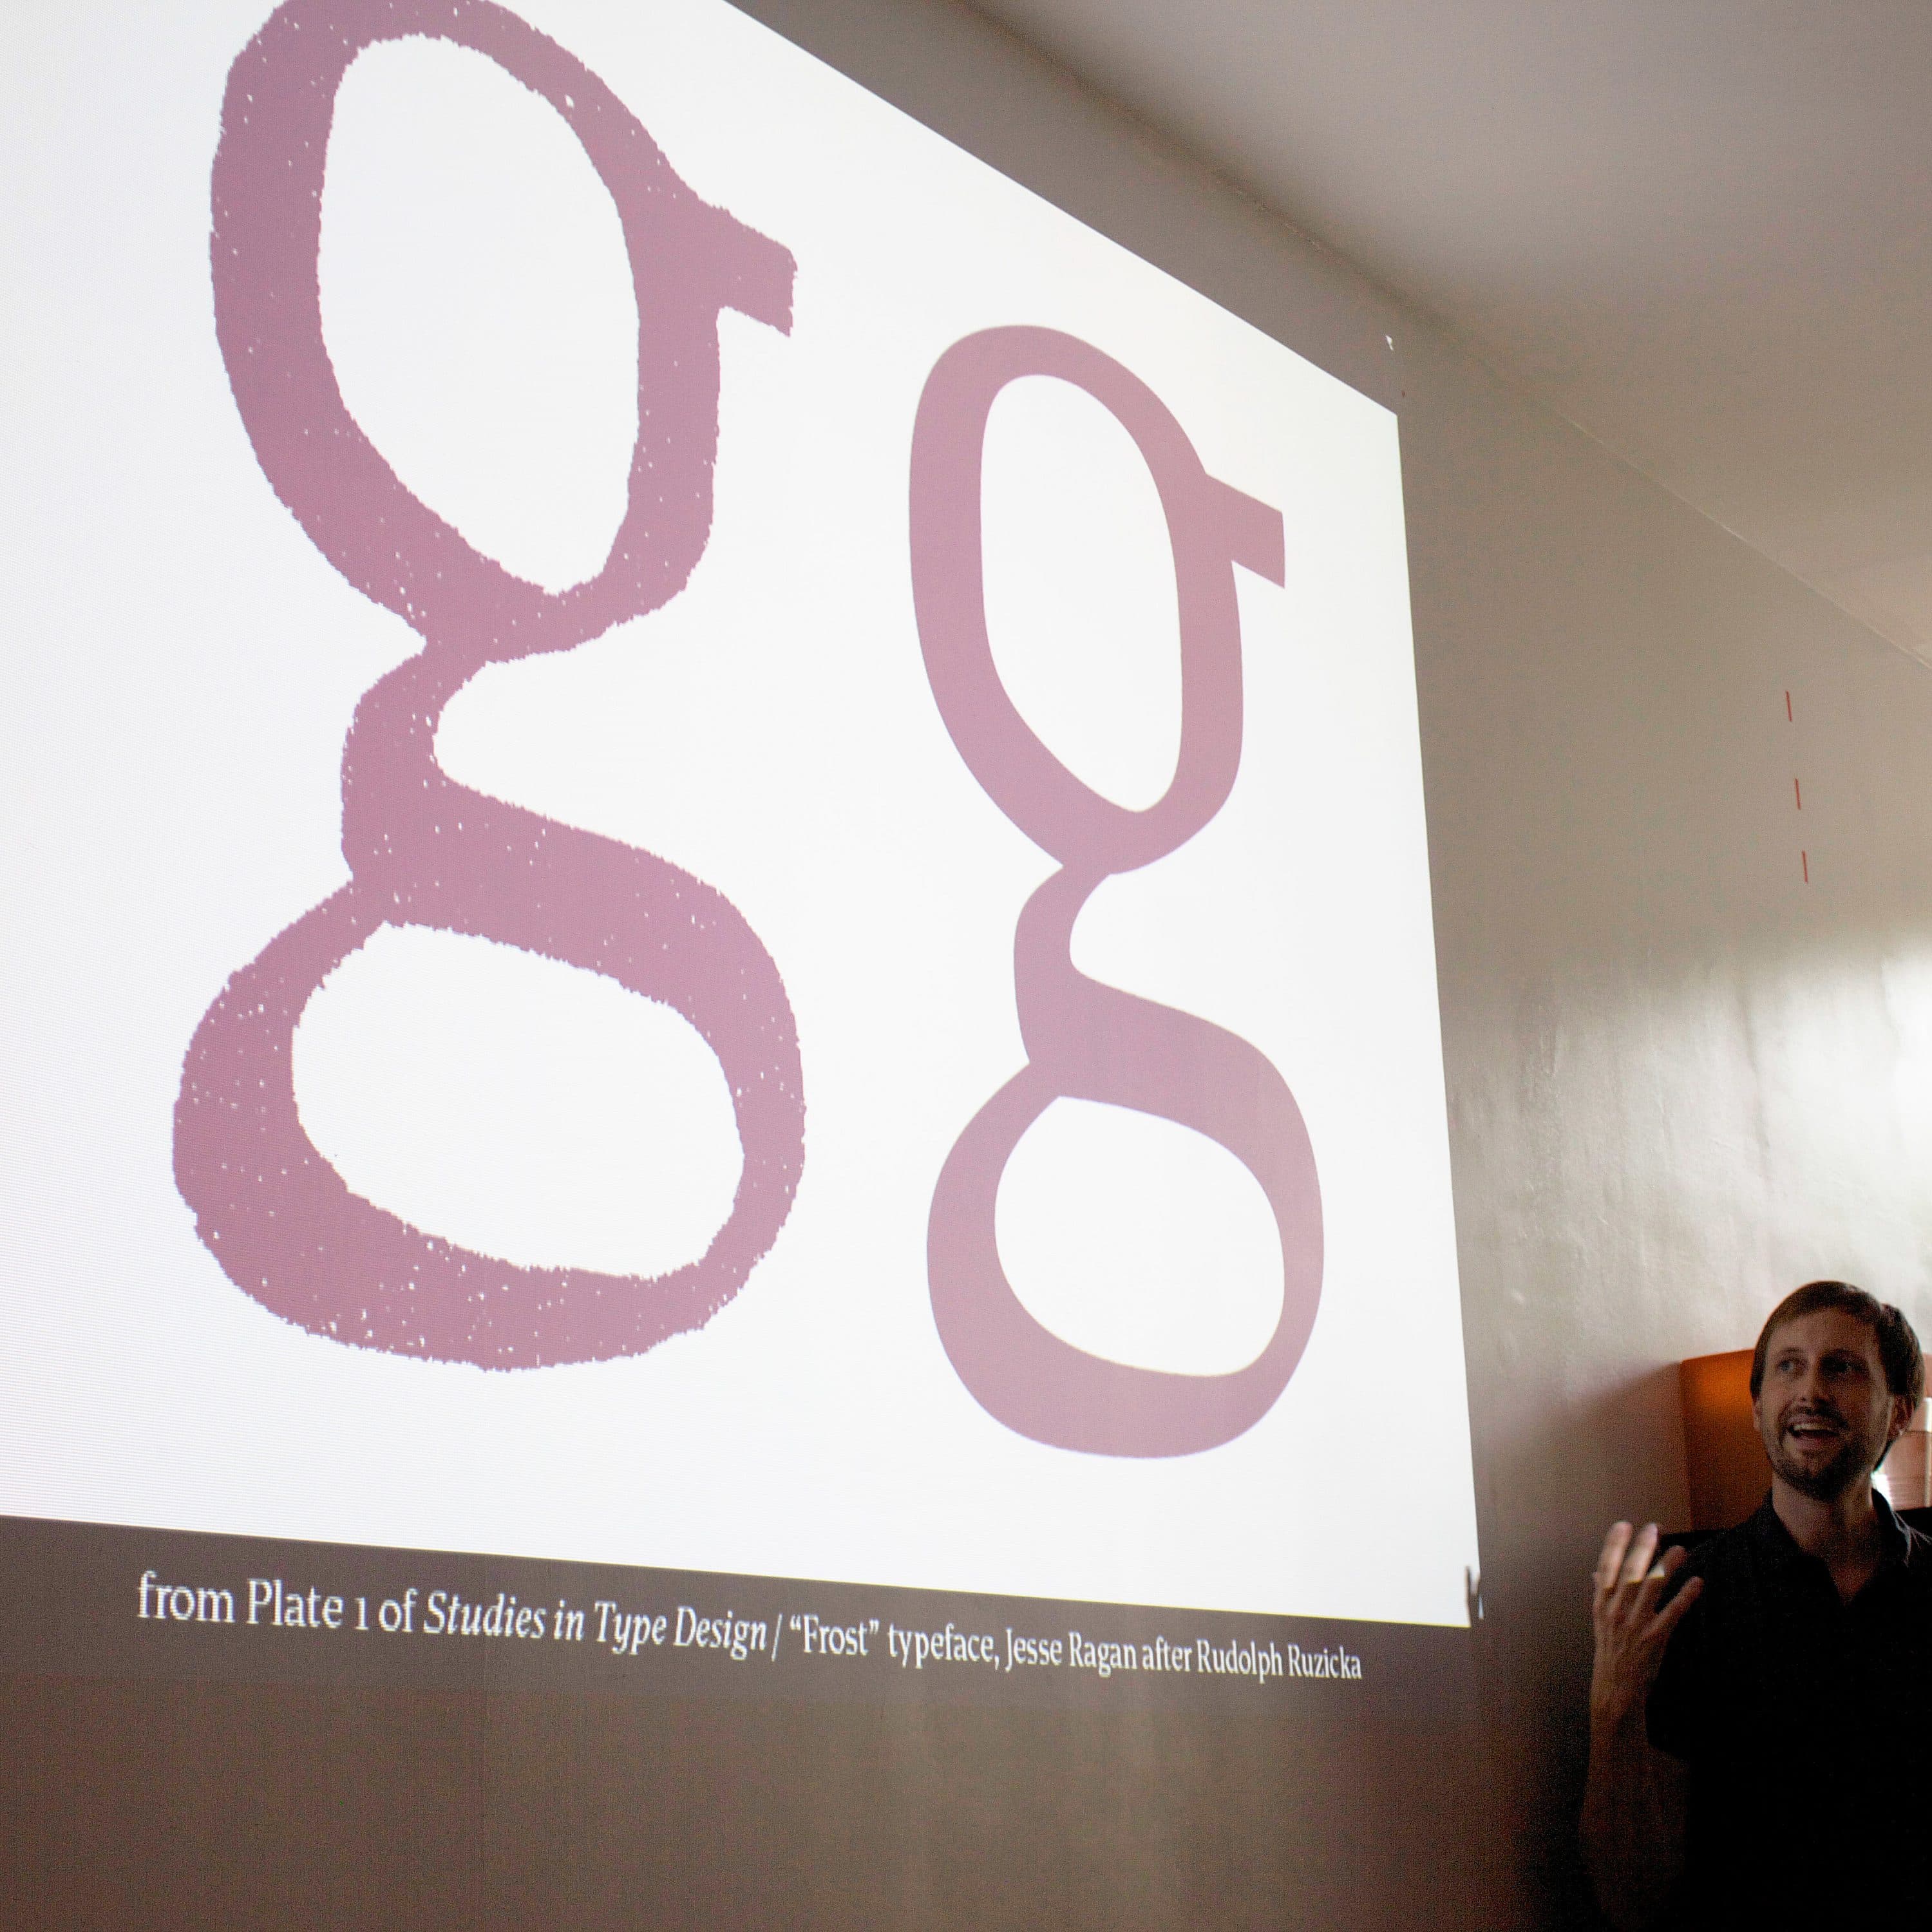 A person stands in front of a projection showing two typeface styles of the letter "g" on a white wall. The slide text reads, "from Plate 1 of Studies in Type Design,” with additional details about the typeface. The person is speaking and gesturing with one hand.